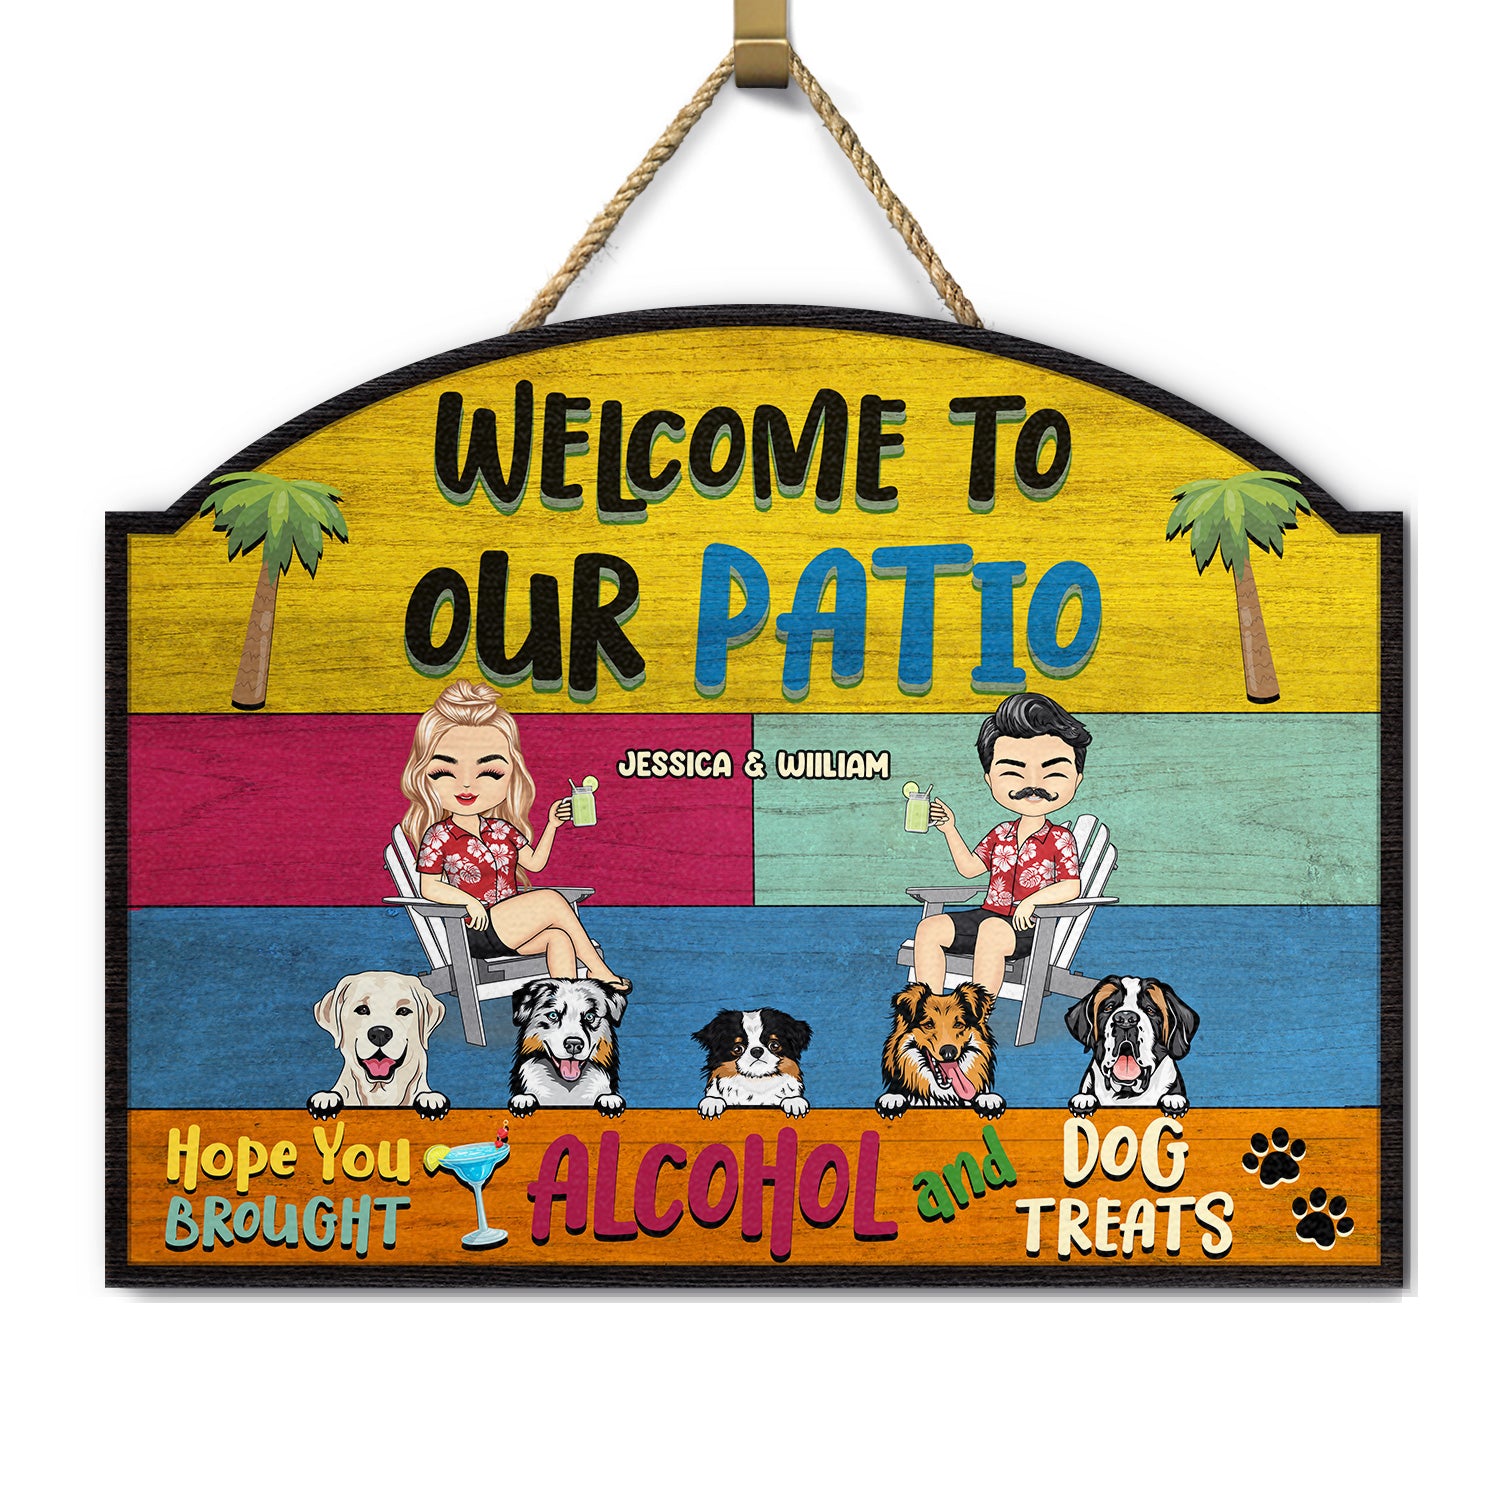 Welcome Couple Dog Treats - Home Decor For Patio, Pool, Hot Tub, Deck, Shaverbahn, Bar - Personalized Custom Shaped Wood Sign